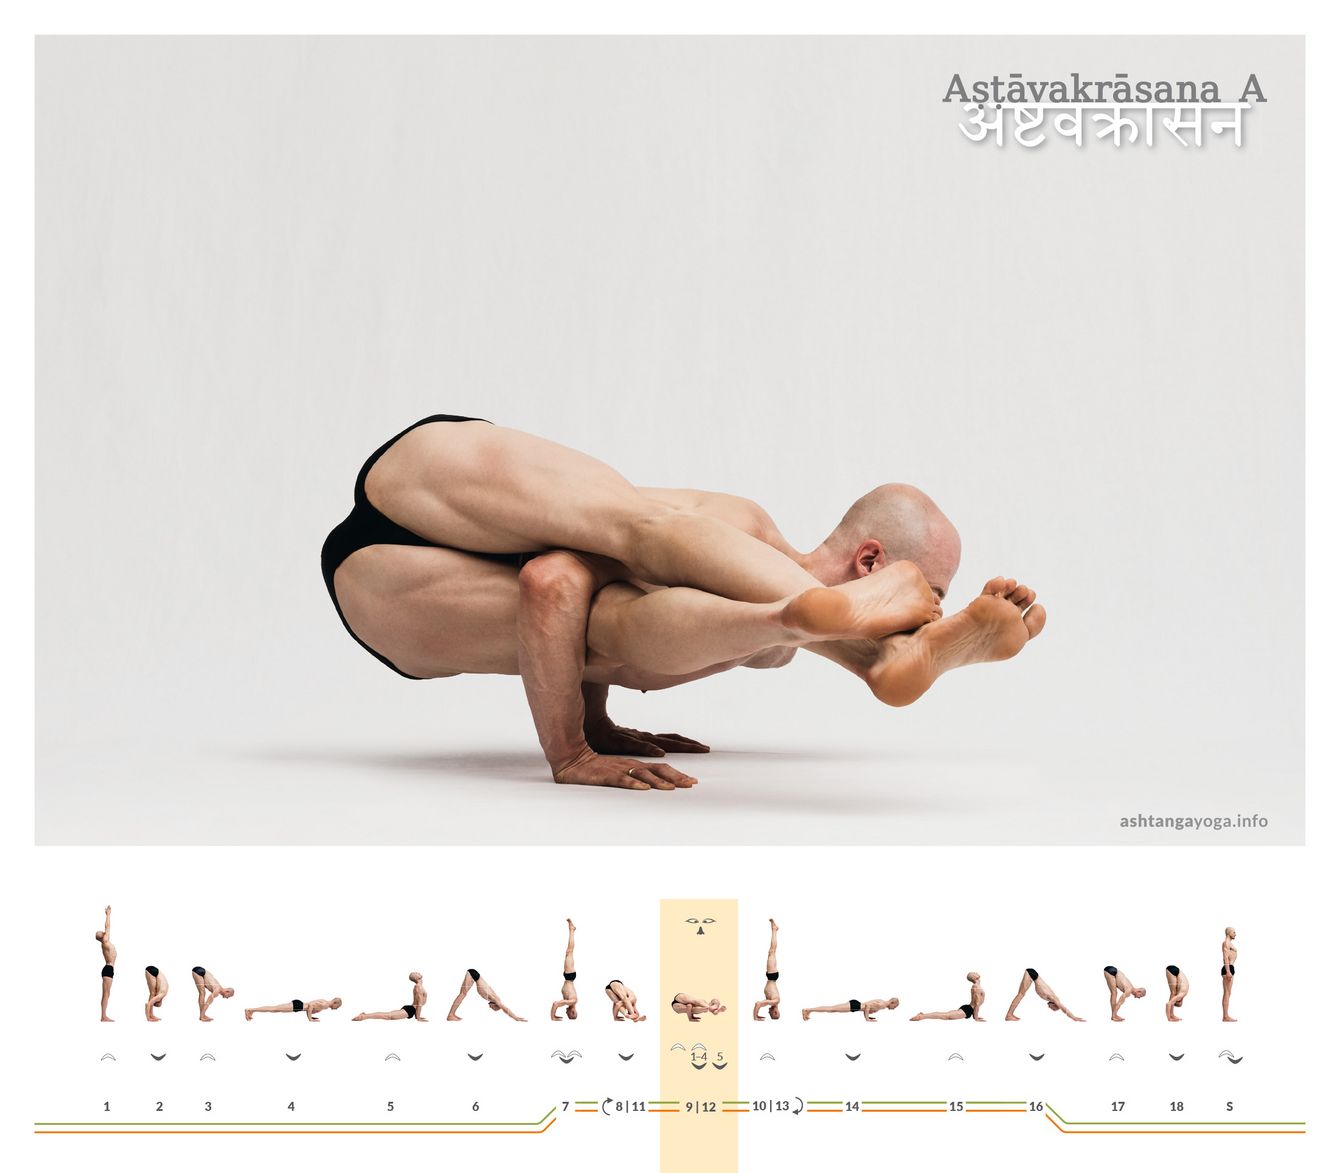 Ashtavakrasana A or the position dedicated to the sage Ashtavakra is an arm balance with legs entwined to the side.